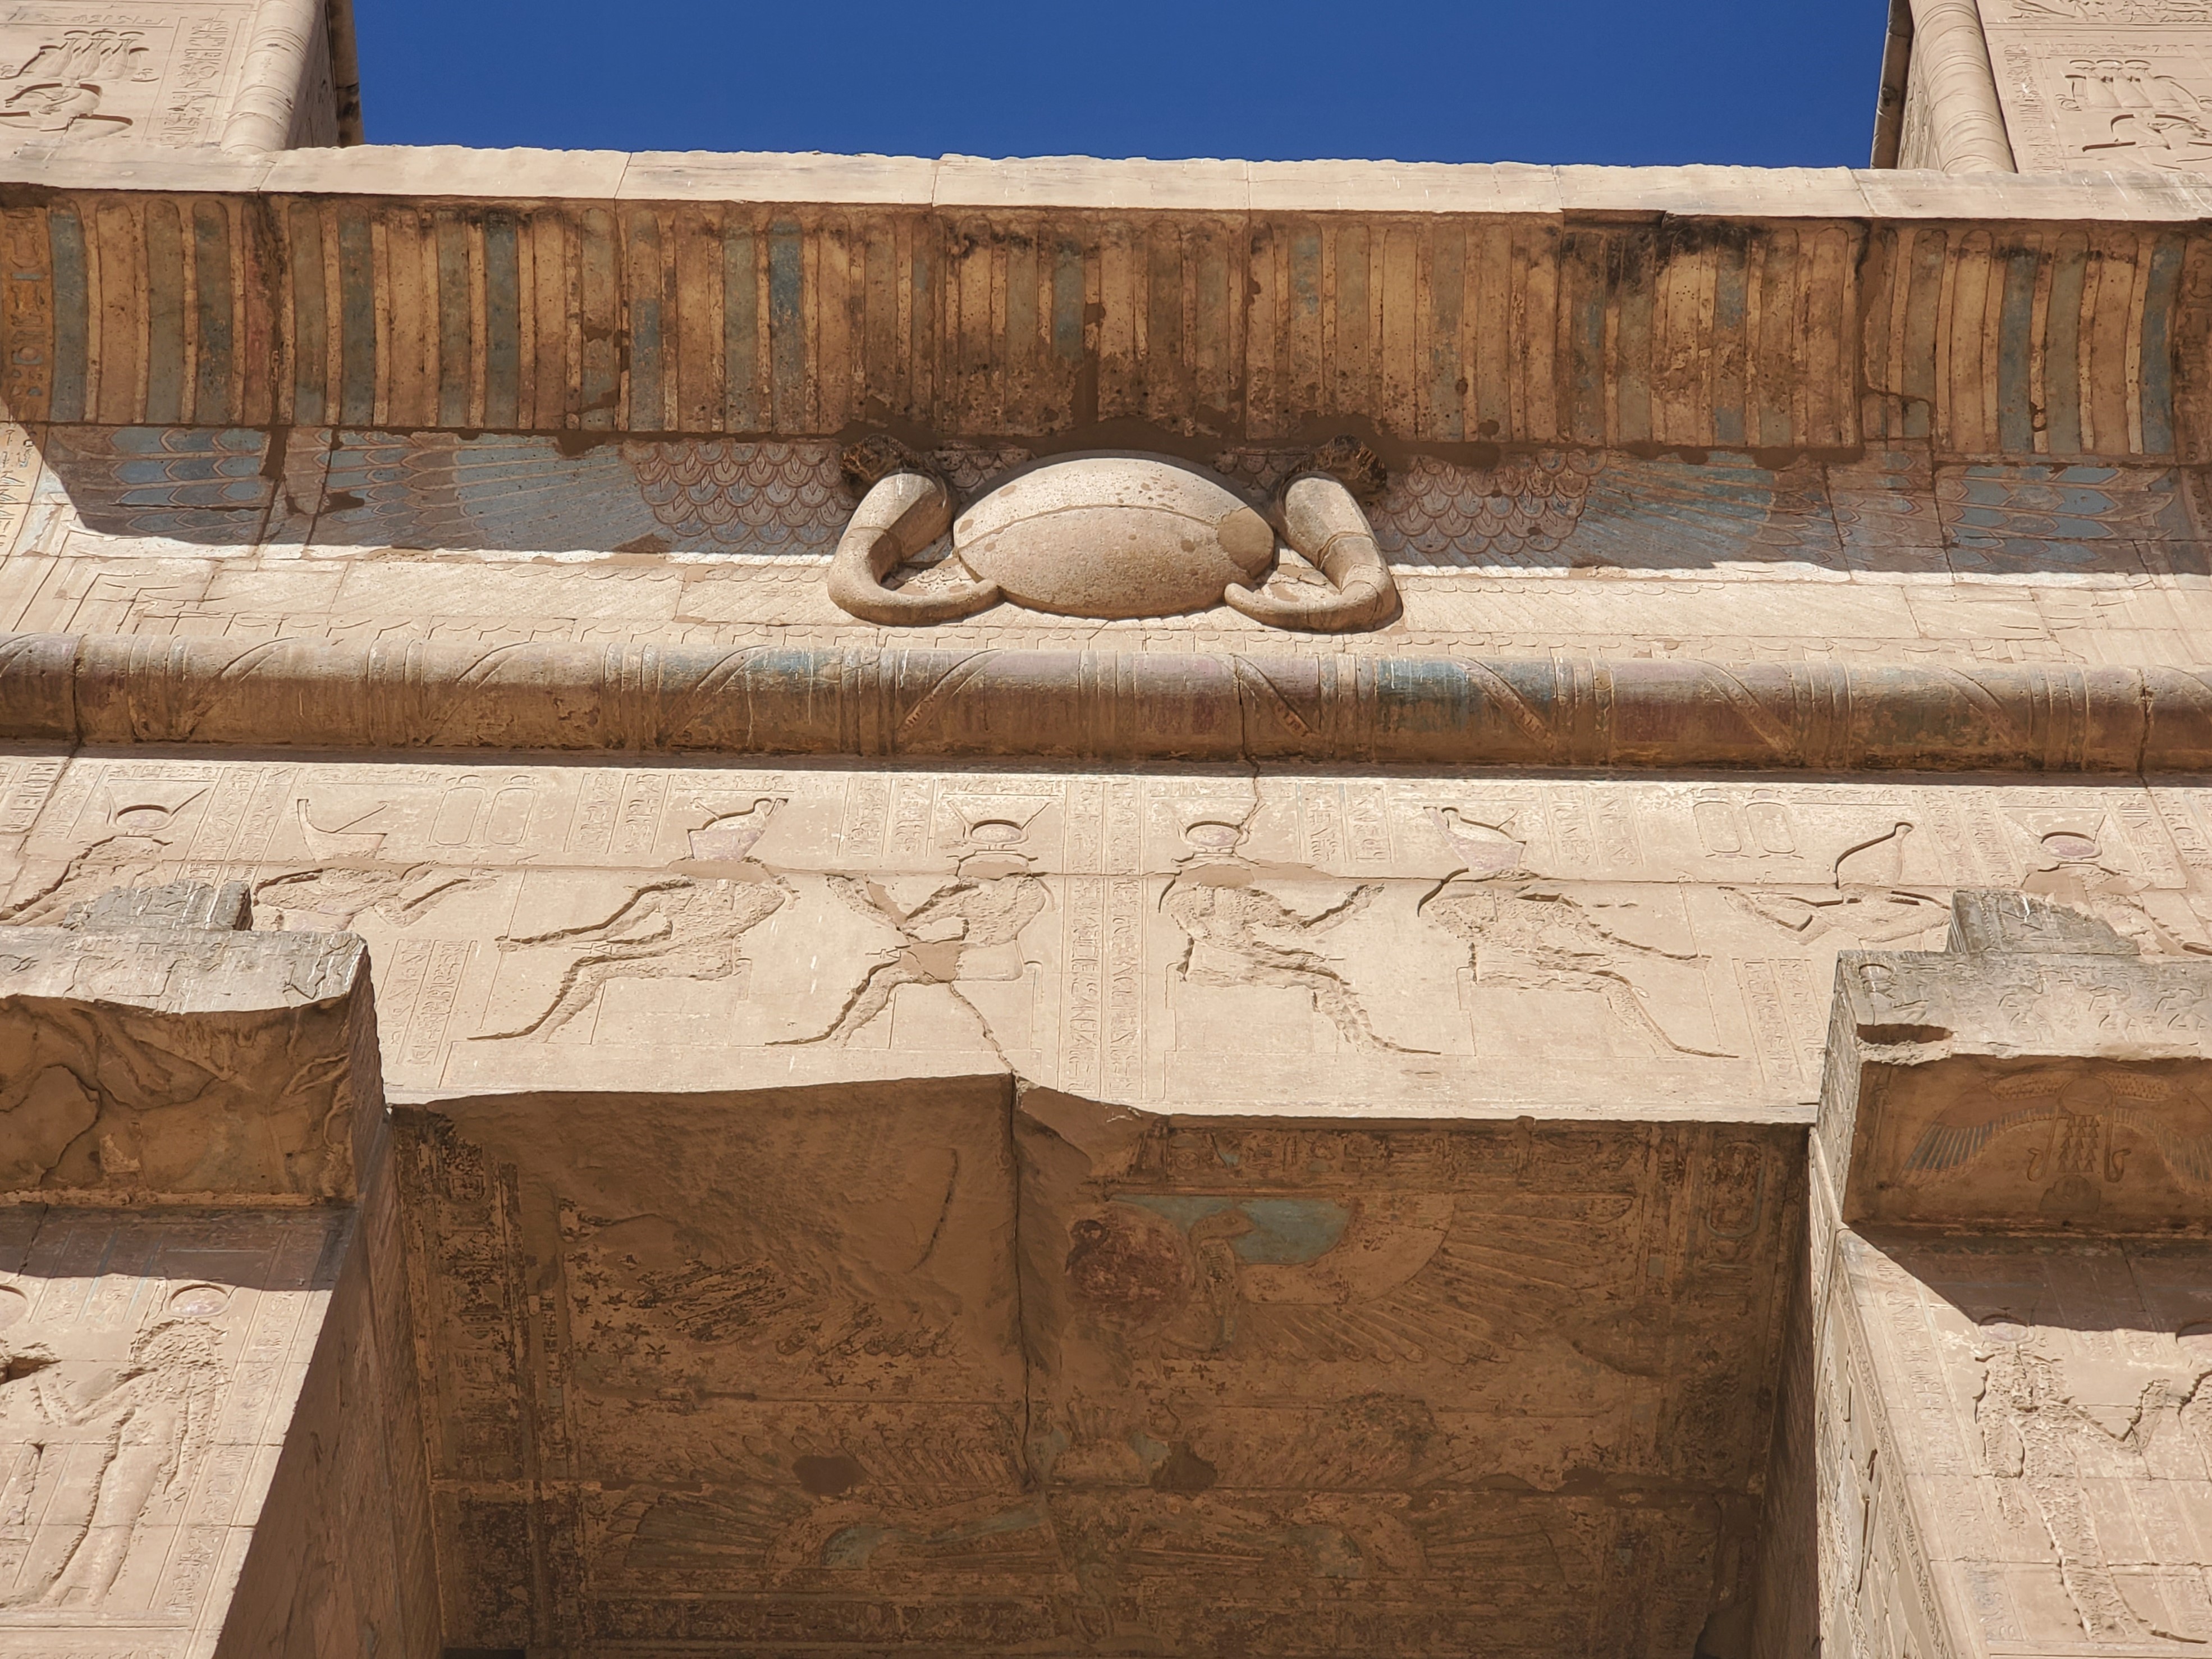 A view of the carvings and colors of the lintel at the Temple of Horus at Edfu